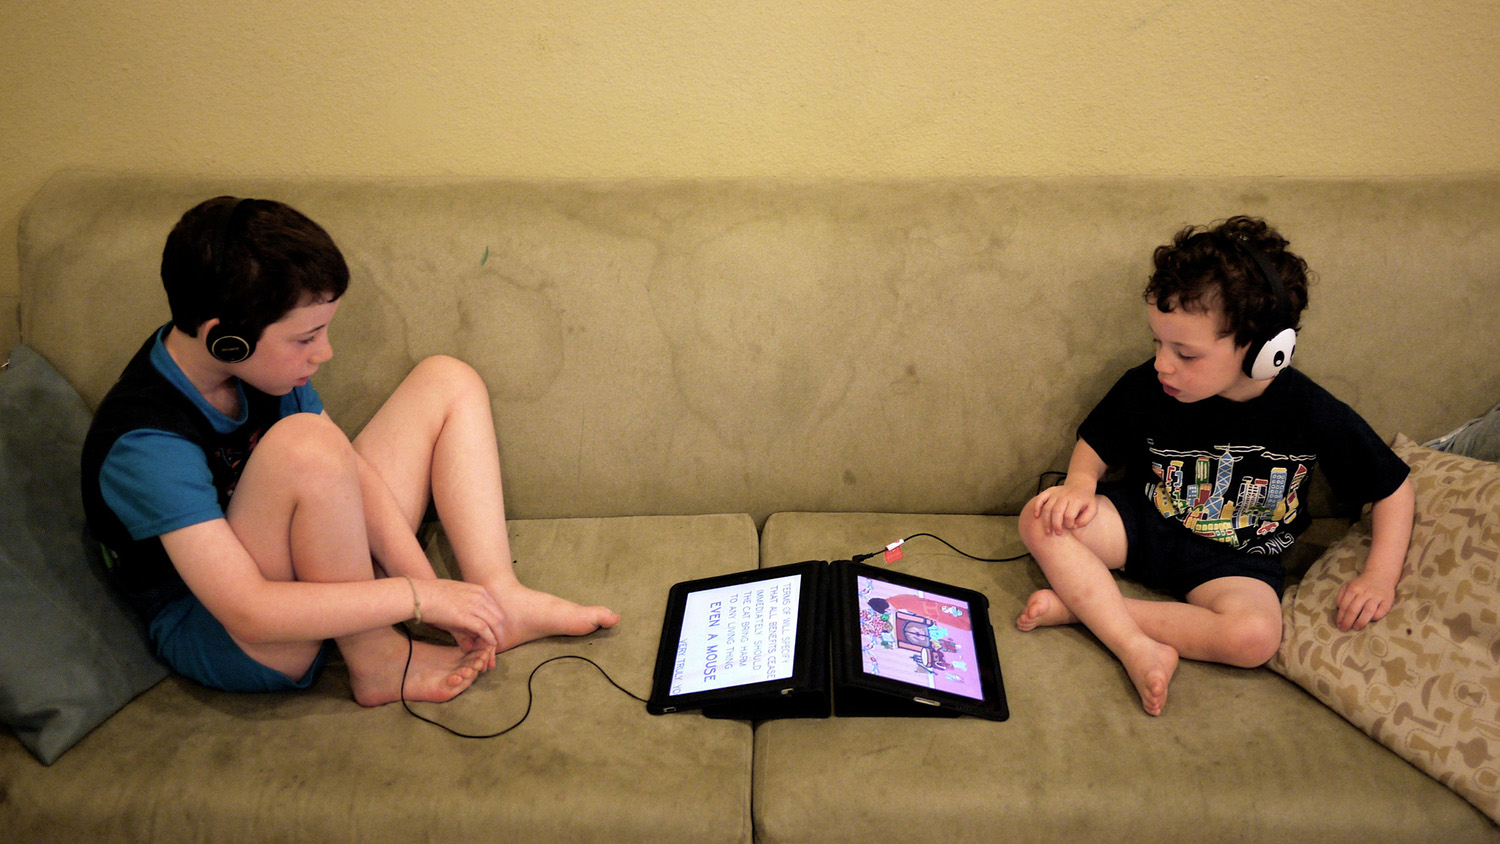 children on sofa with devices